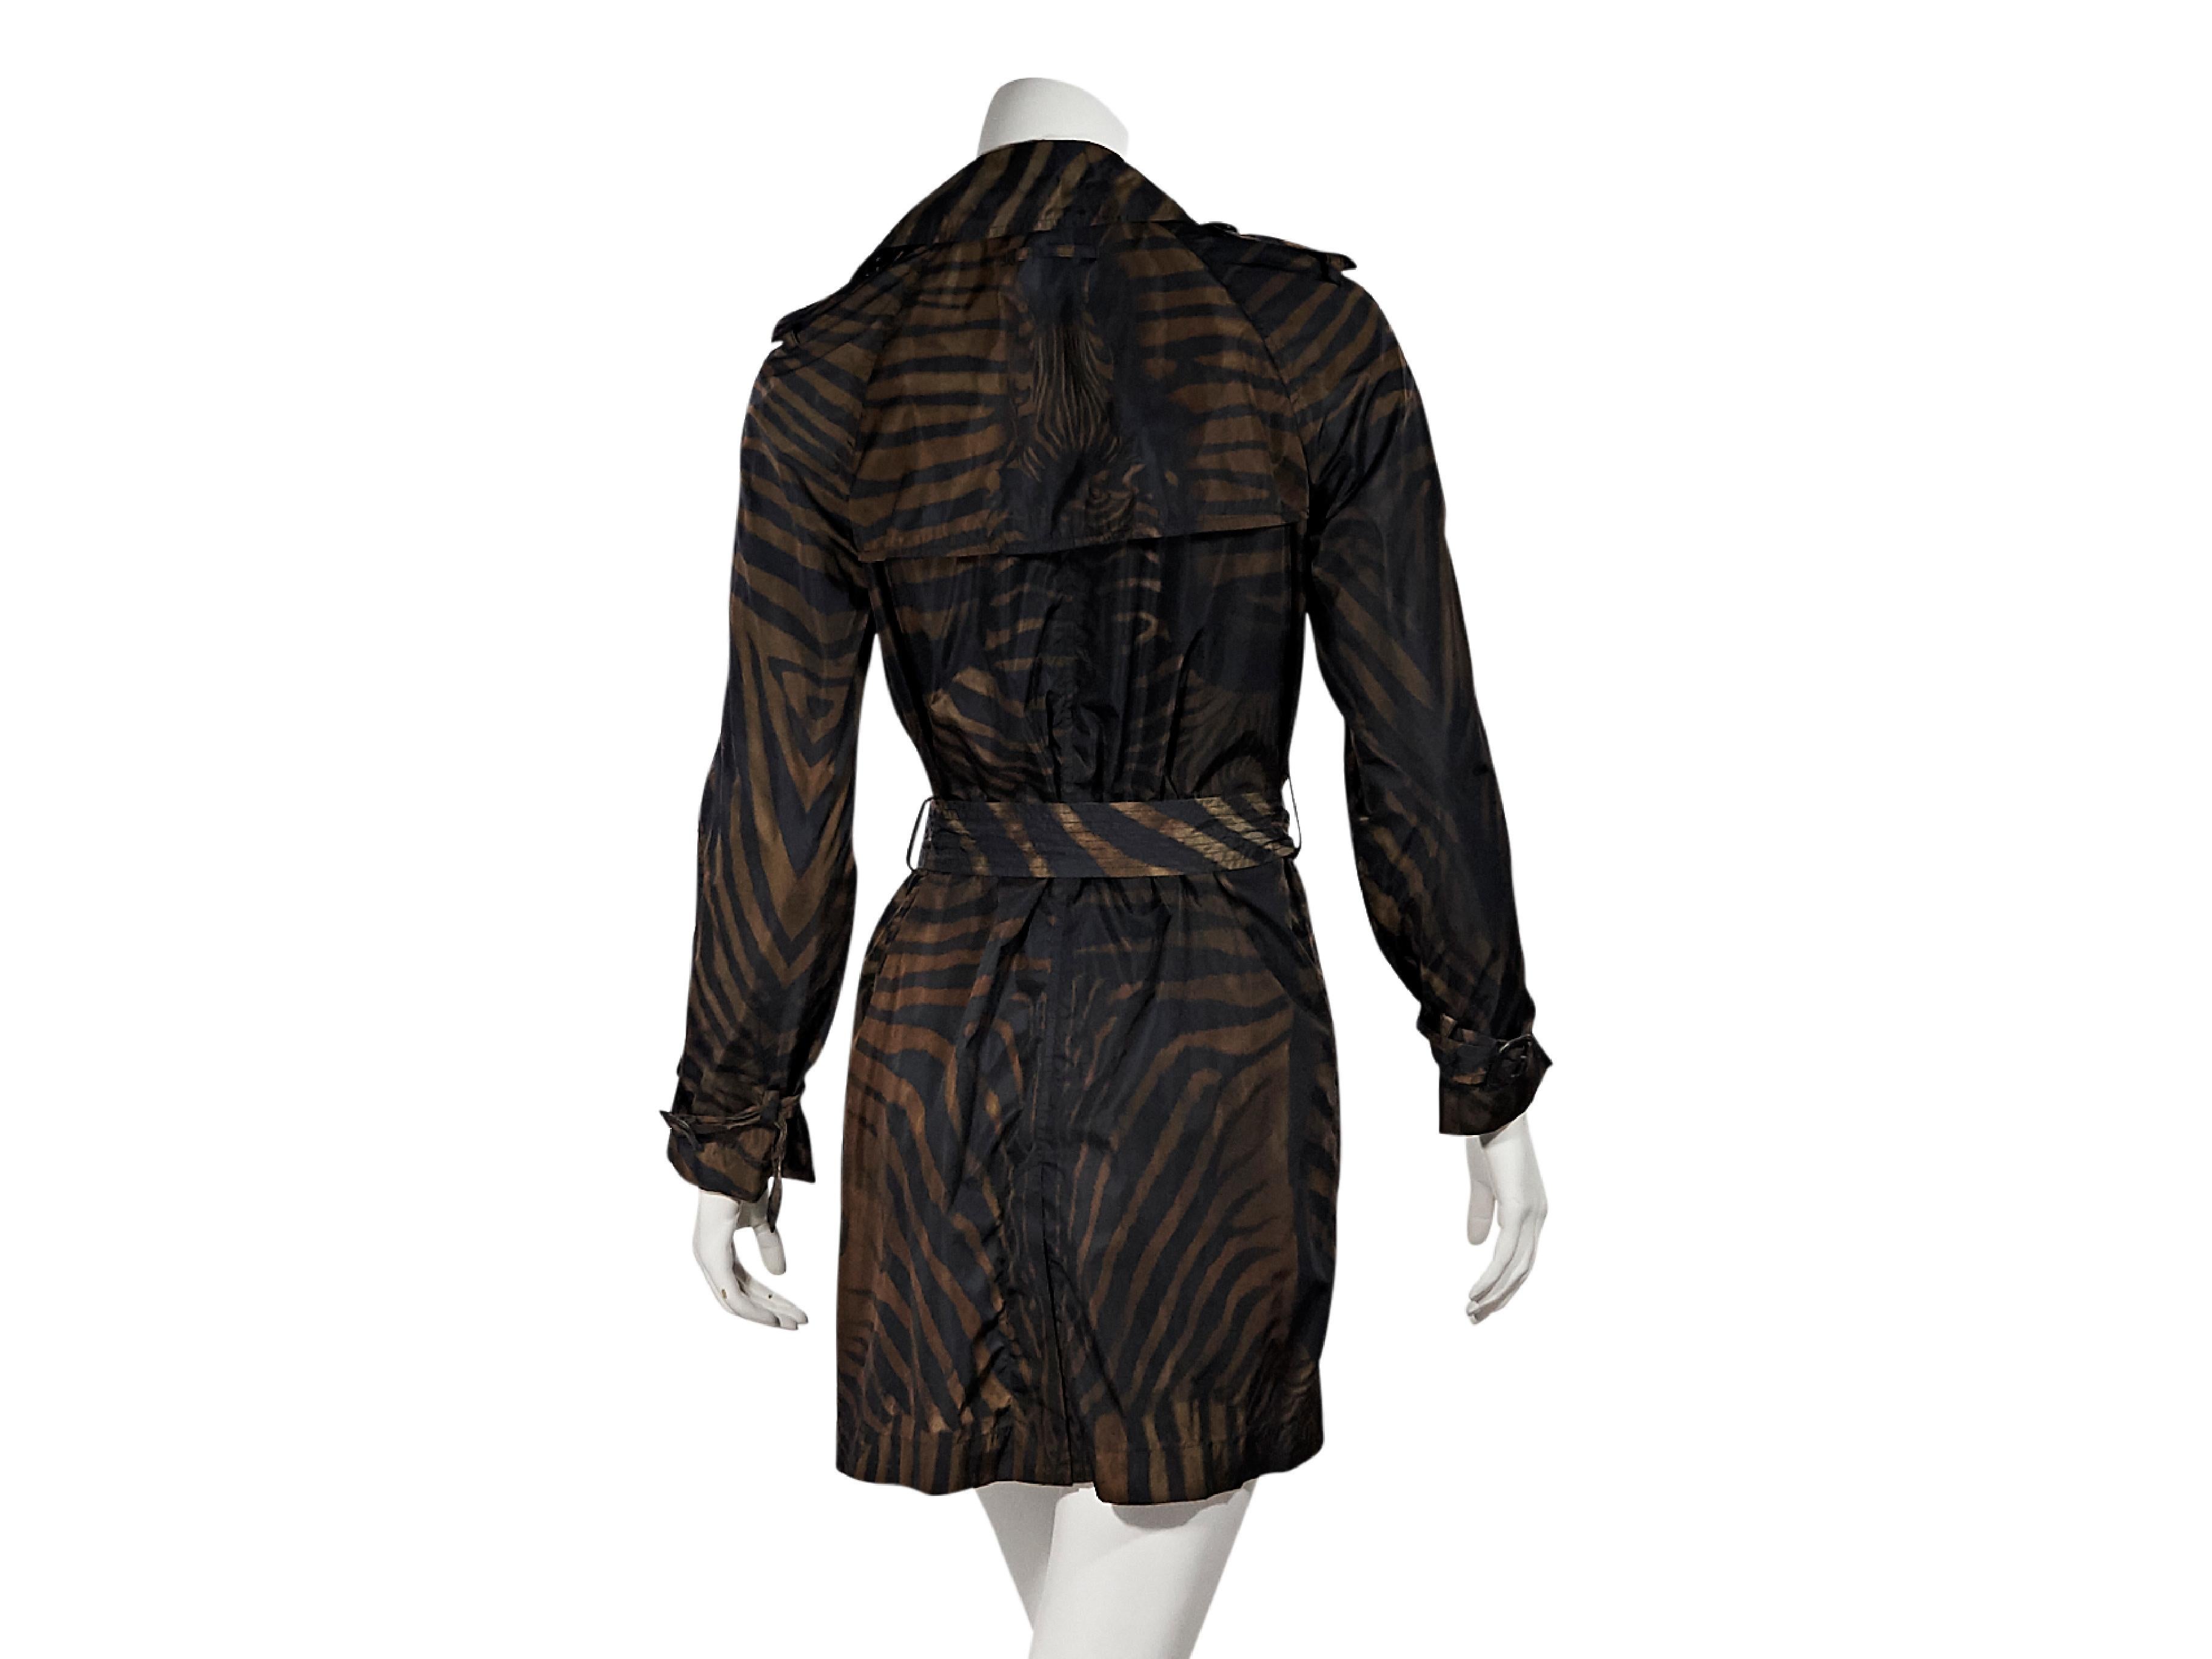 Product details:  Brown and black zebra-printed lightweight trench coat by Jean Paul Gaultier.  Notched lapel.  Long sleeves.  Button shoulder epaulettes.  Double-breasted button-front closure.  Adjustable belted waist.  Waist slide pockets.  Back